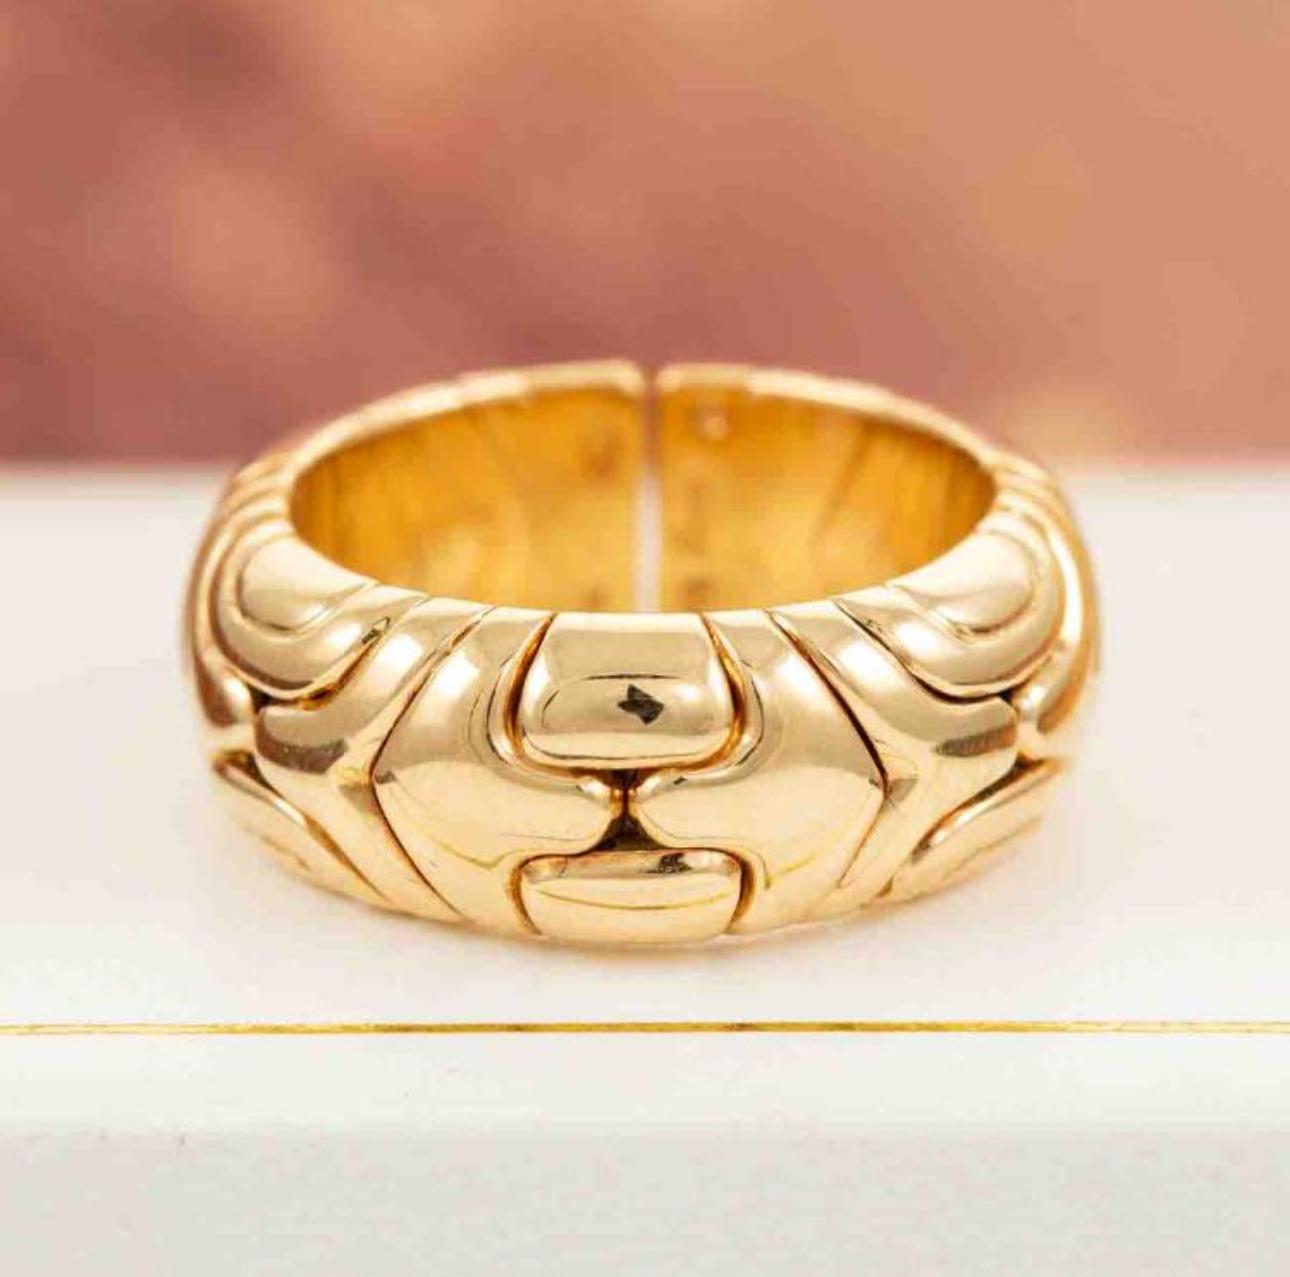 Classic Alveare ring designed by Bvlgari.

A geometric flexible Alveare ring band, crafted in Rome Italy by the house of Bulgari in solid yellow 18 k gold. Dated 1980'.

Has a total weight of 18 grams. The actual size is 7, flexible up to 8.